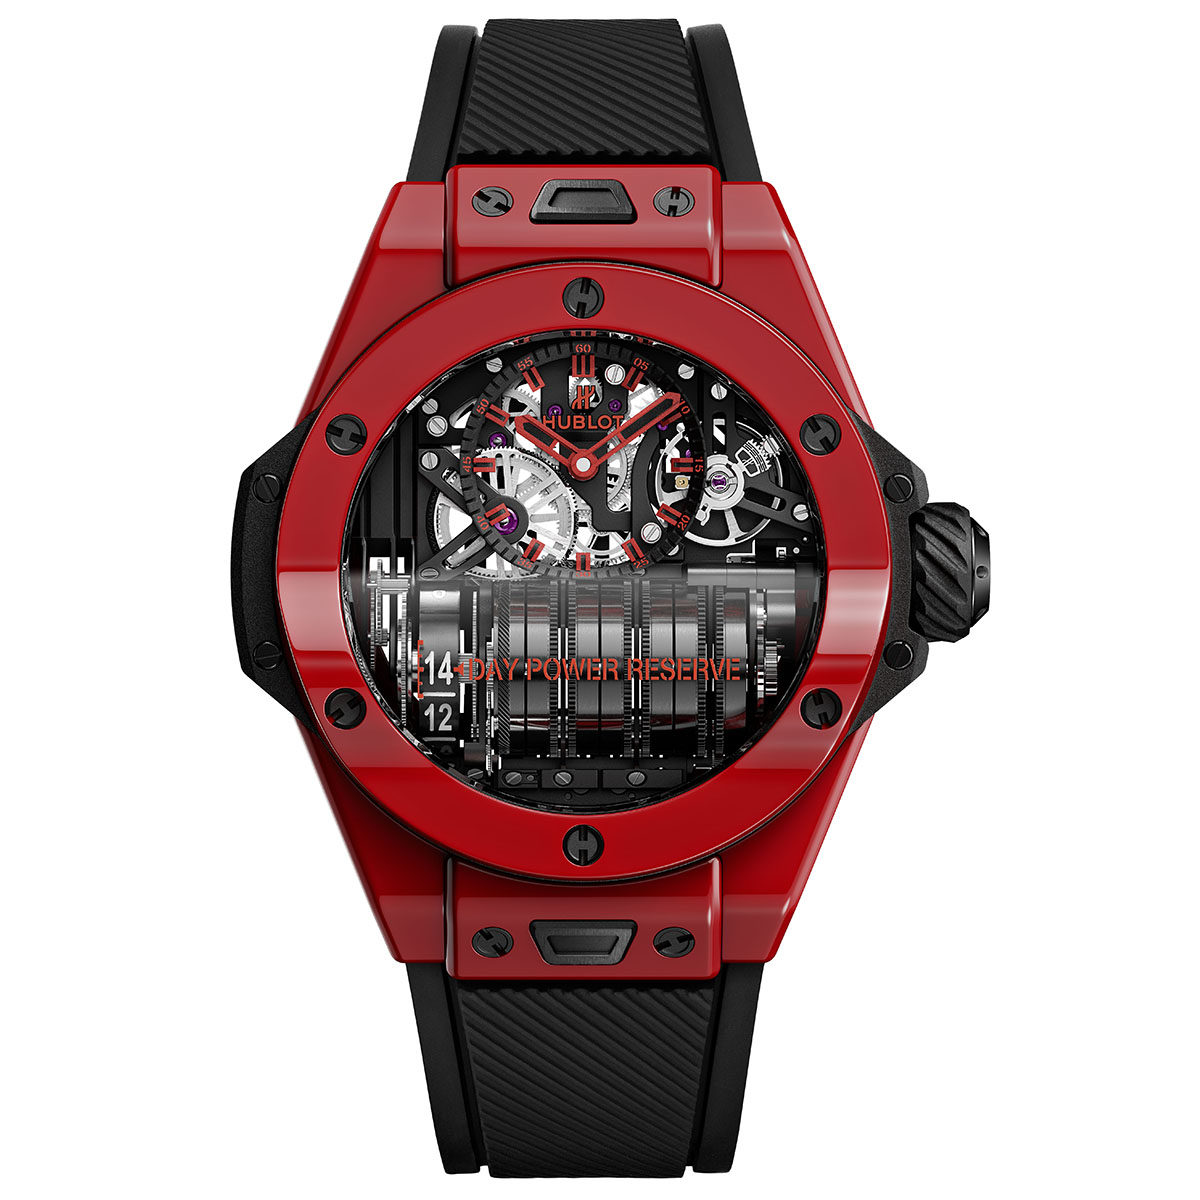 BIG BANG <br>MP-11 POWER RESERVE <br>14 DAYS RED MAGIC